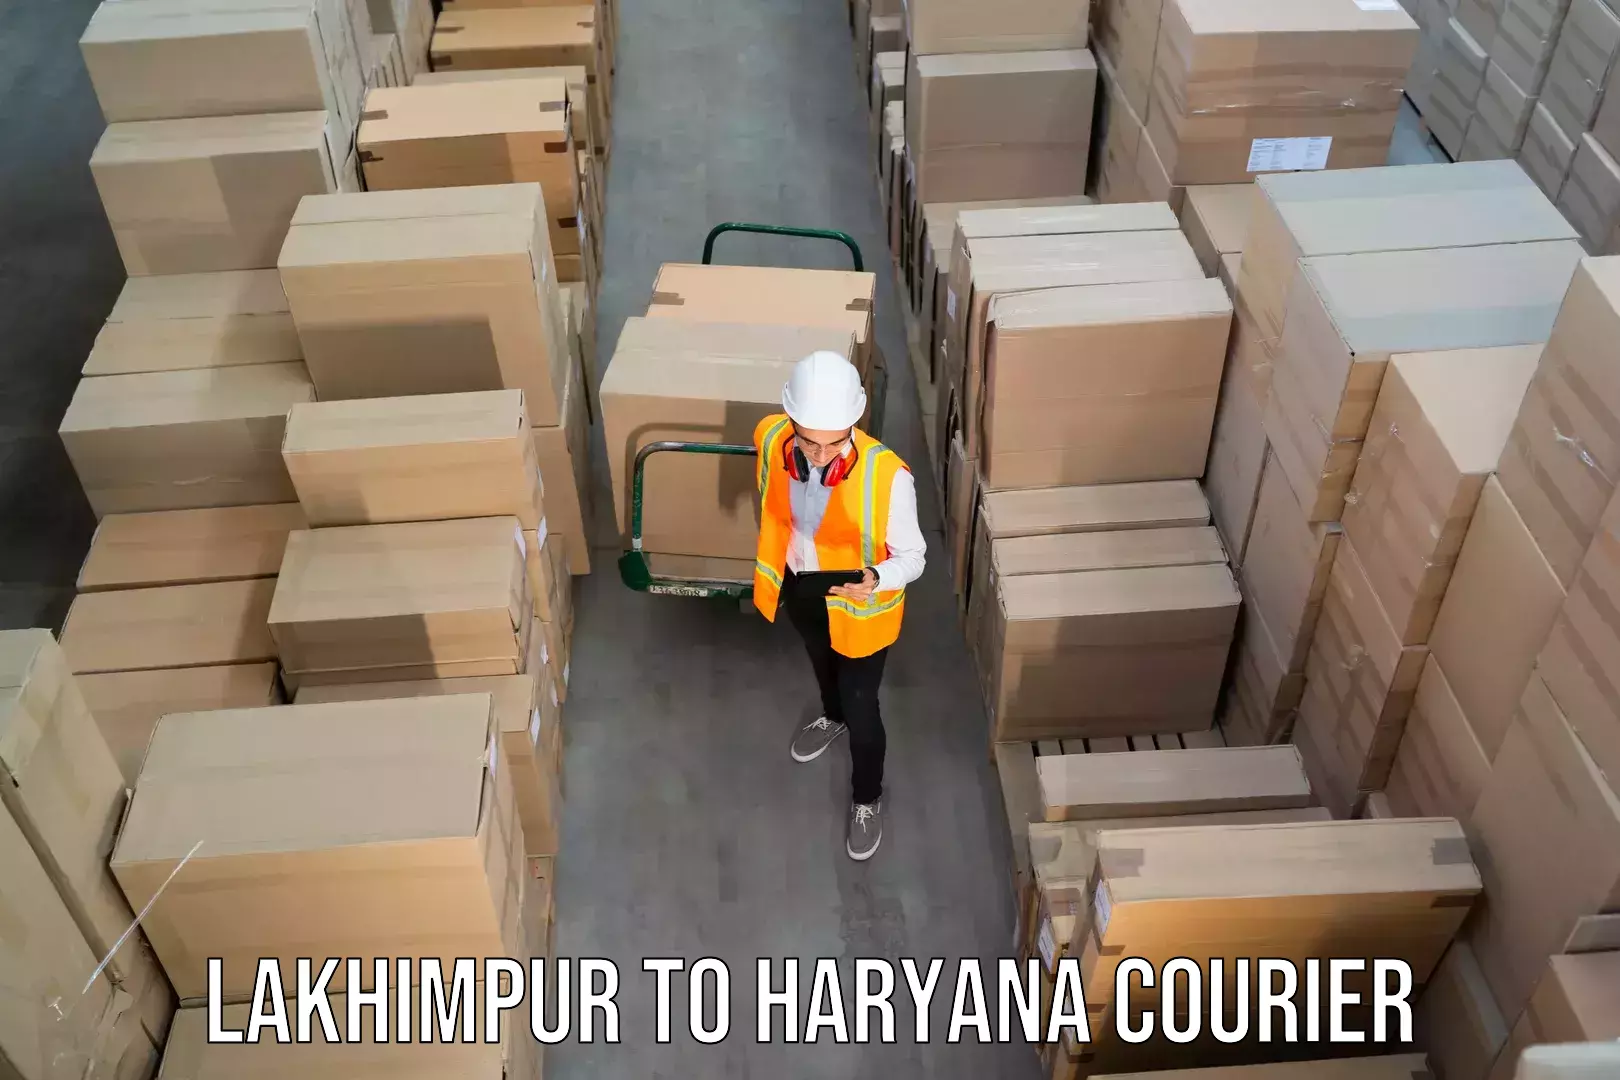 Next-day delivery options Lakhimpur to Bilaspur Haryana